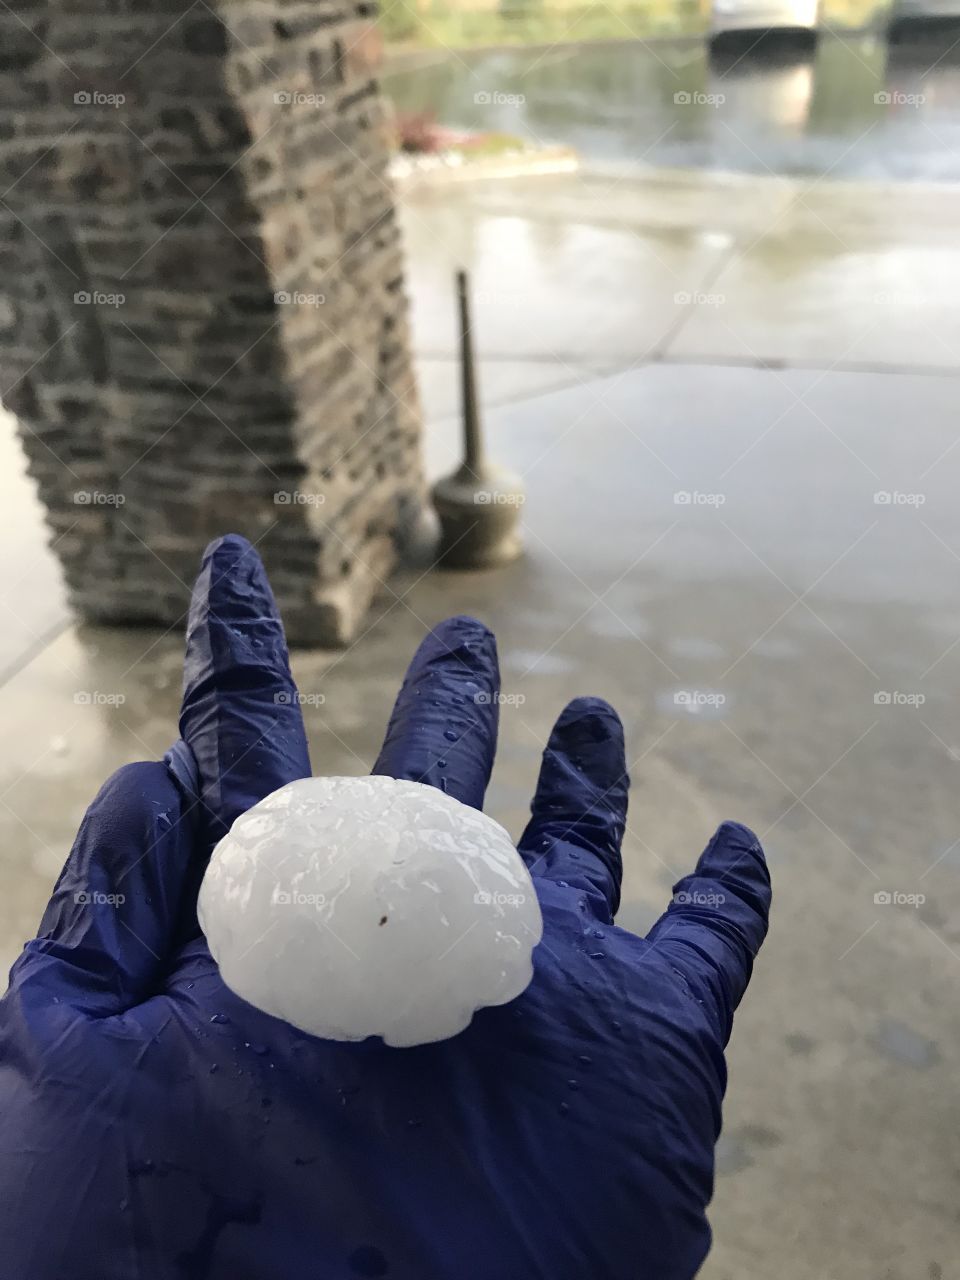 Giant hailed in boulder Colorado today 